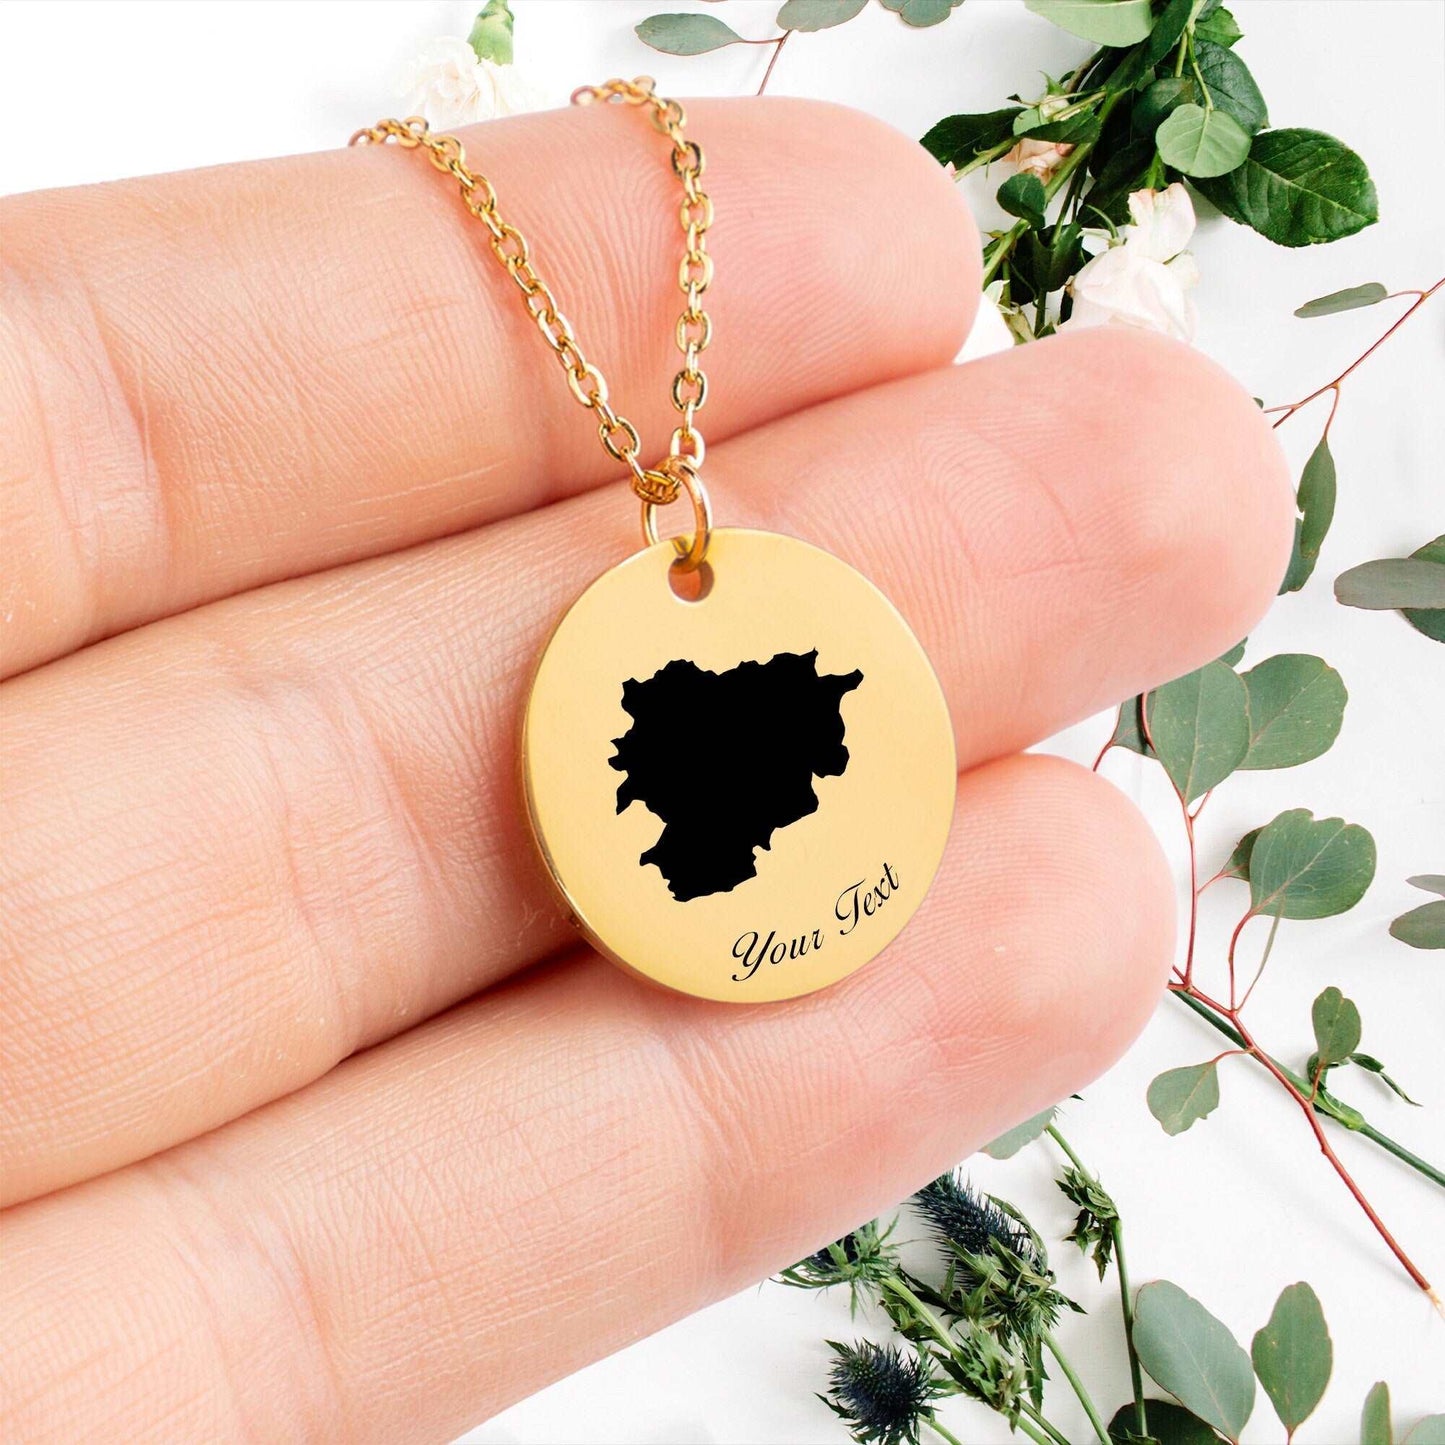 Andora Country Map Necklace, Your Name Necklace, Minimalist Necklace, Personalized Gift, Silver Necklace, Gift For Him Her